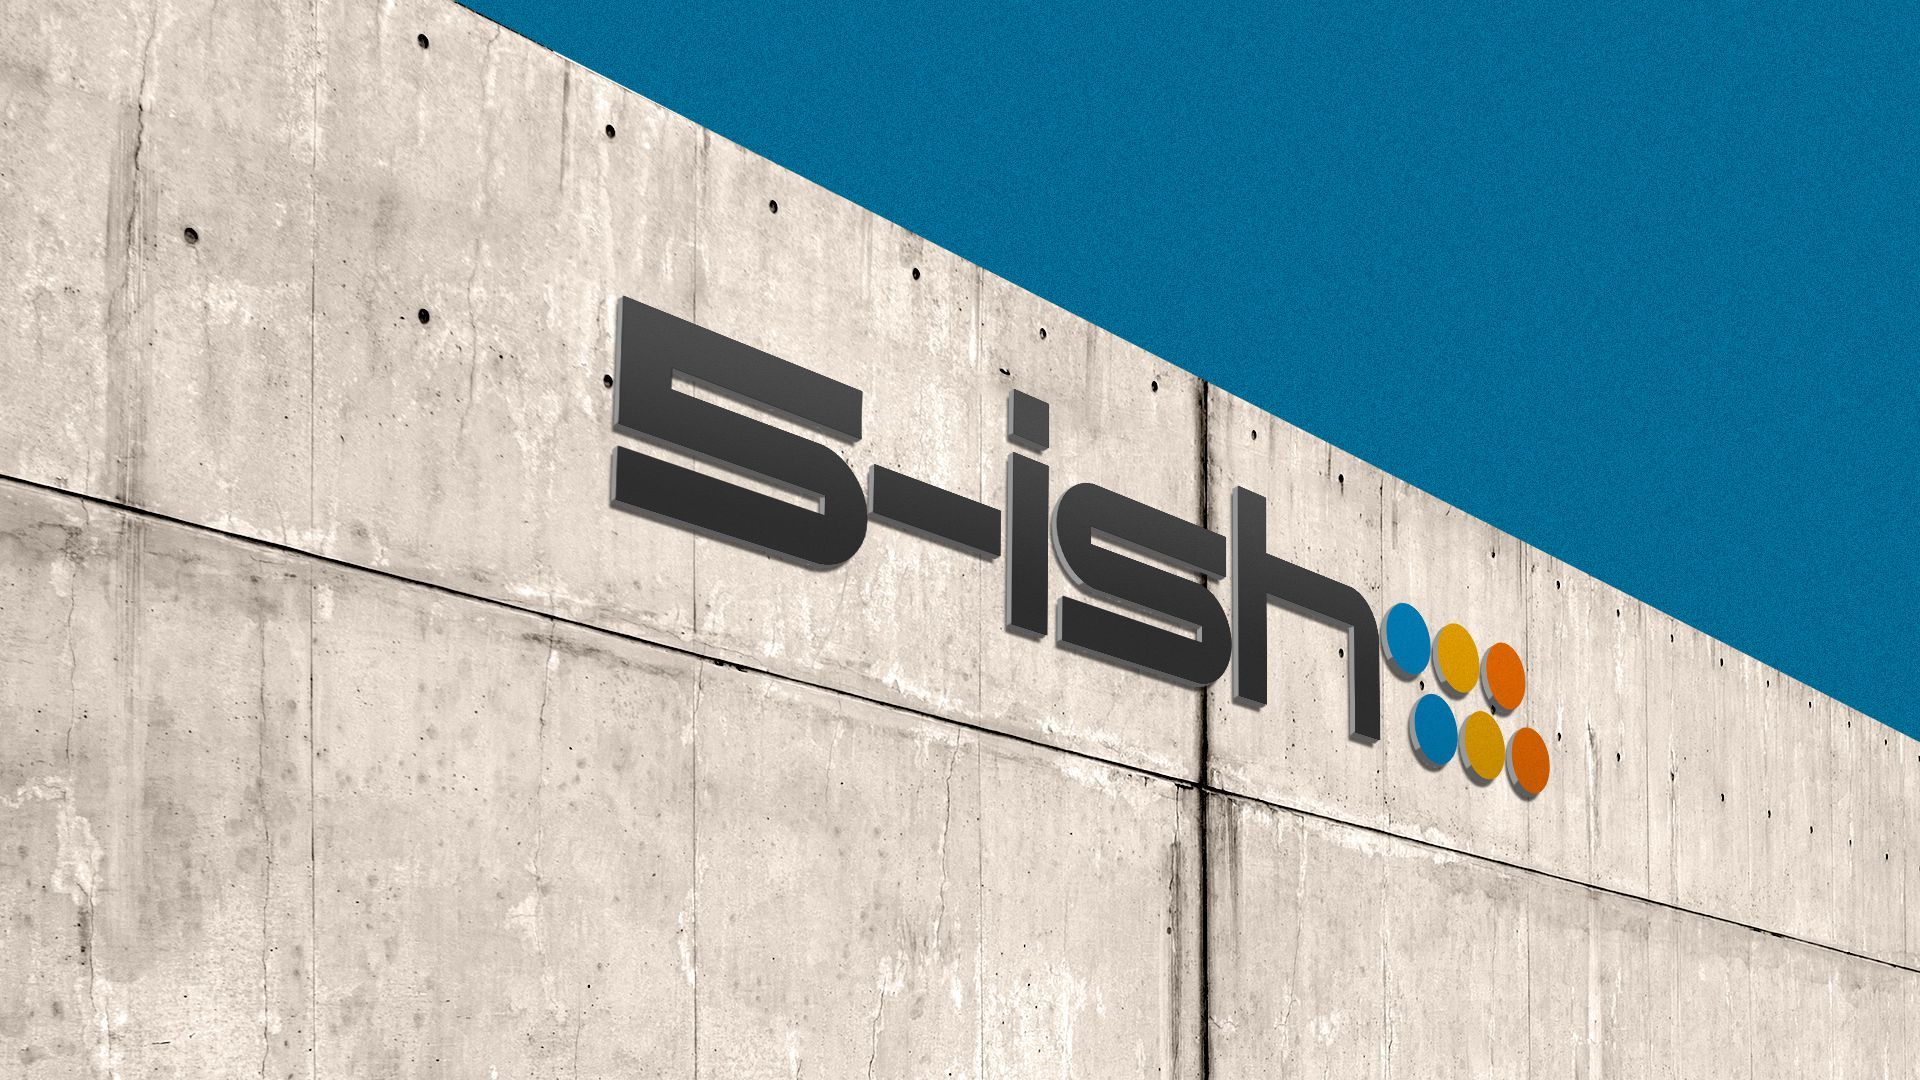 Illustration of concrete wall with a sign reading "5-ish," with six points after it.